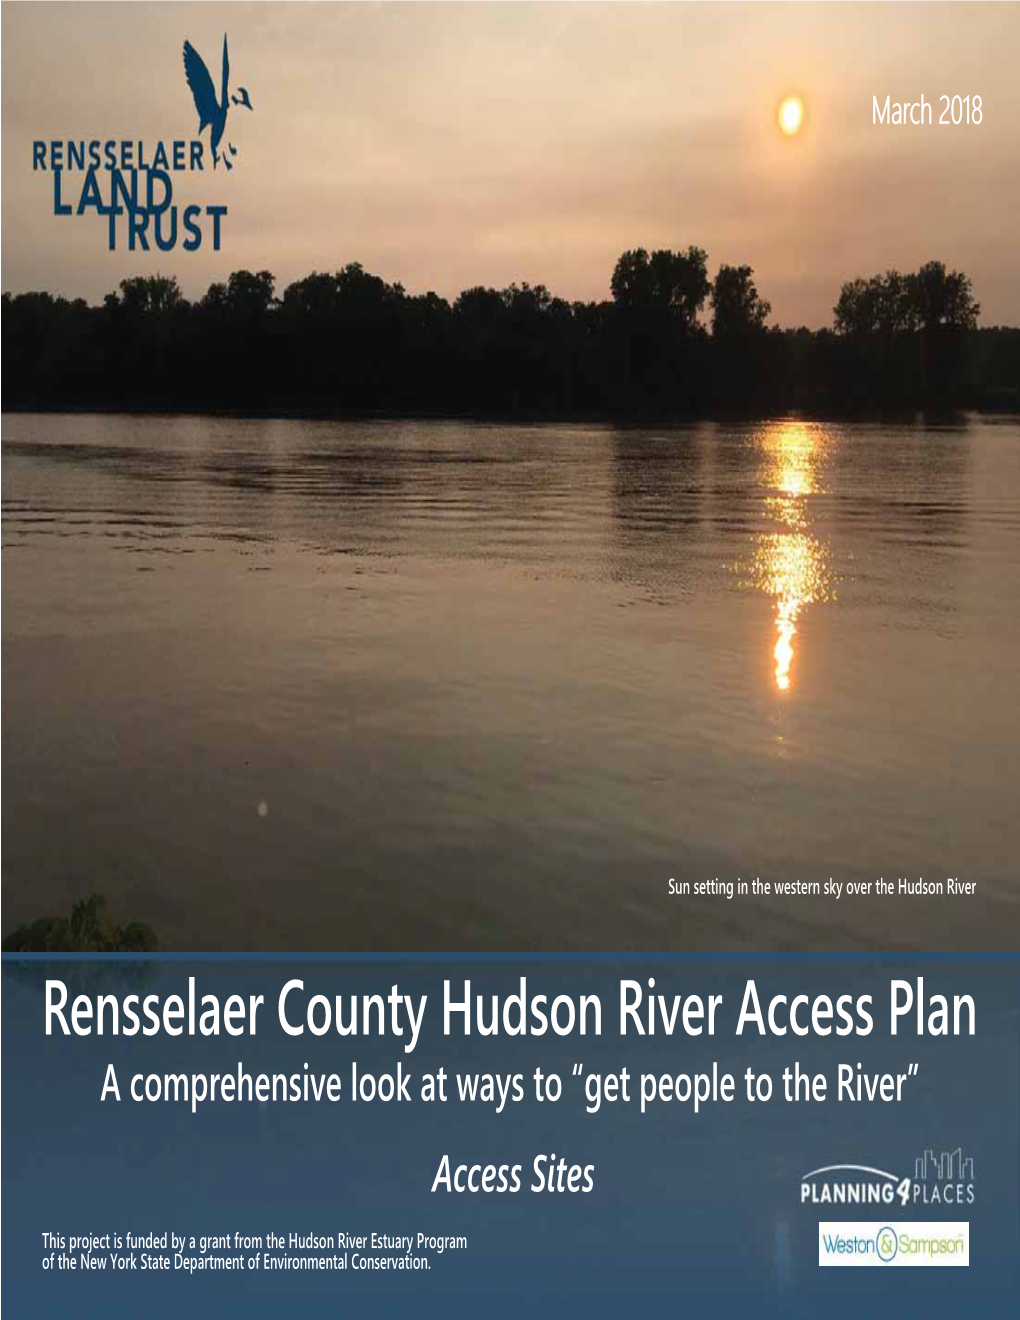 Rensselaer County Hudson River Access Plan a Comprehensive Look at Ways to “Get People to the River” Access Sites